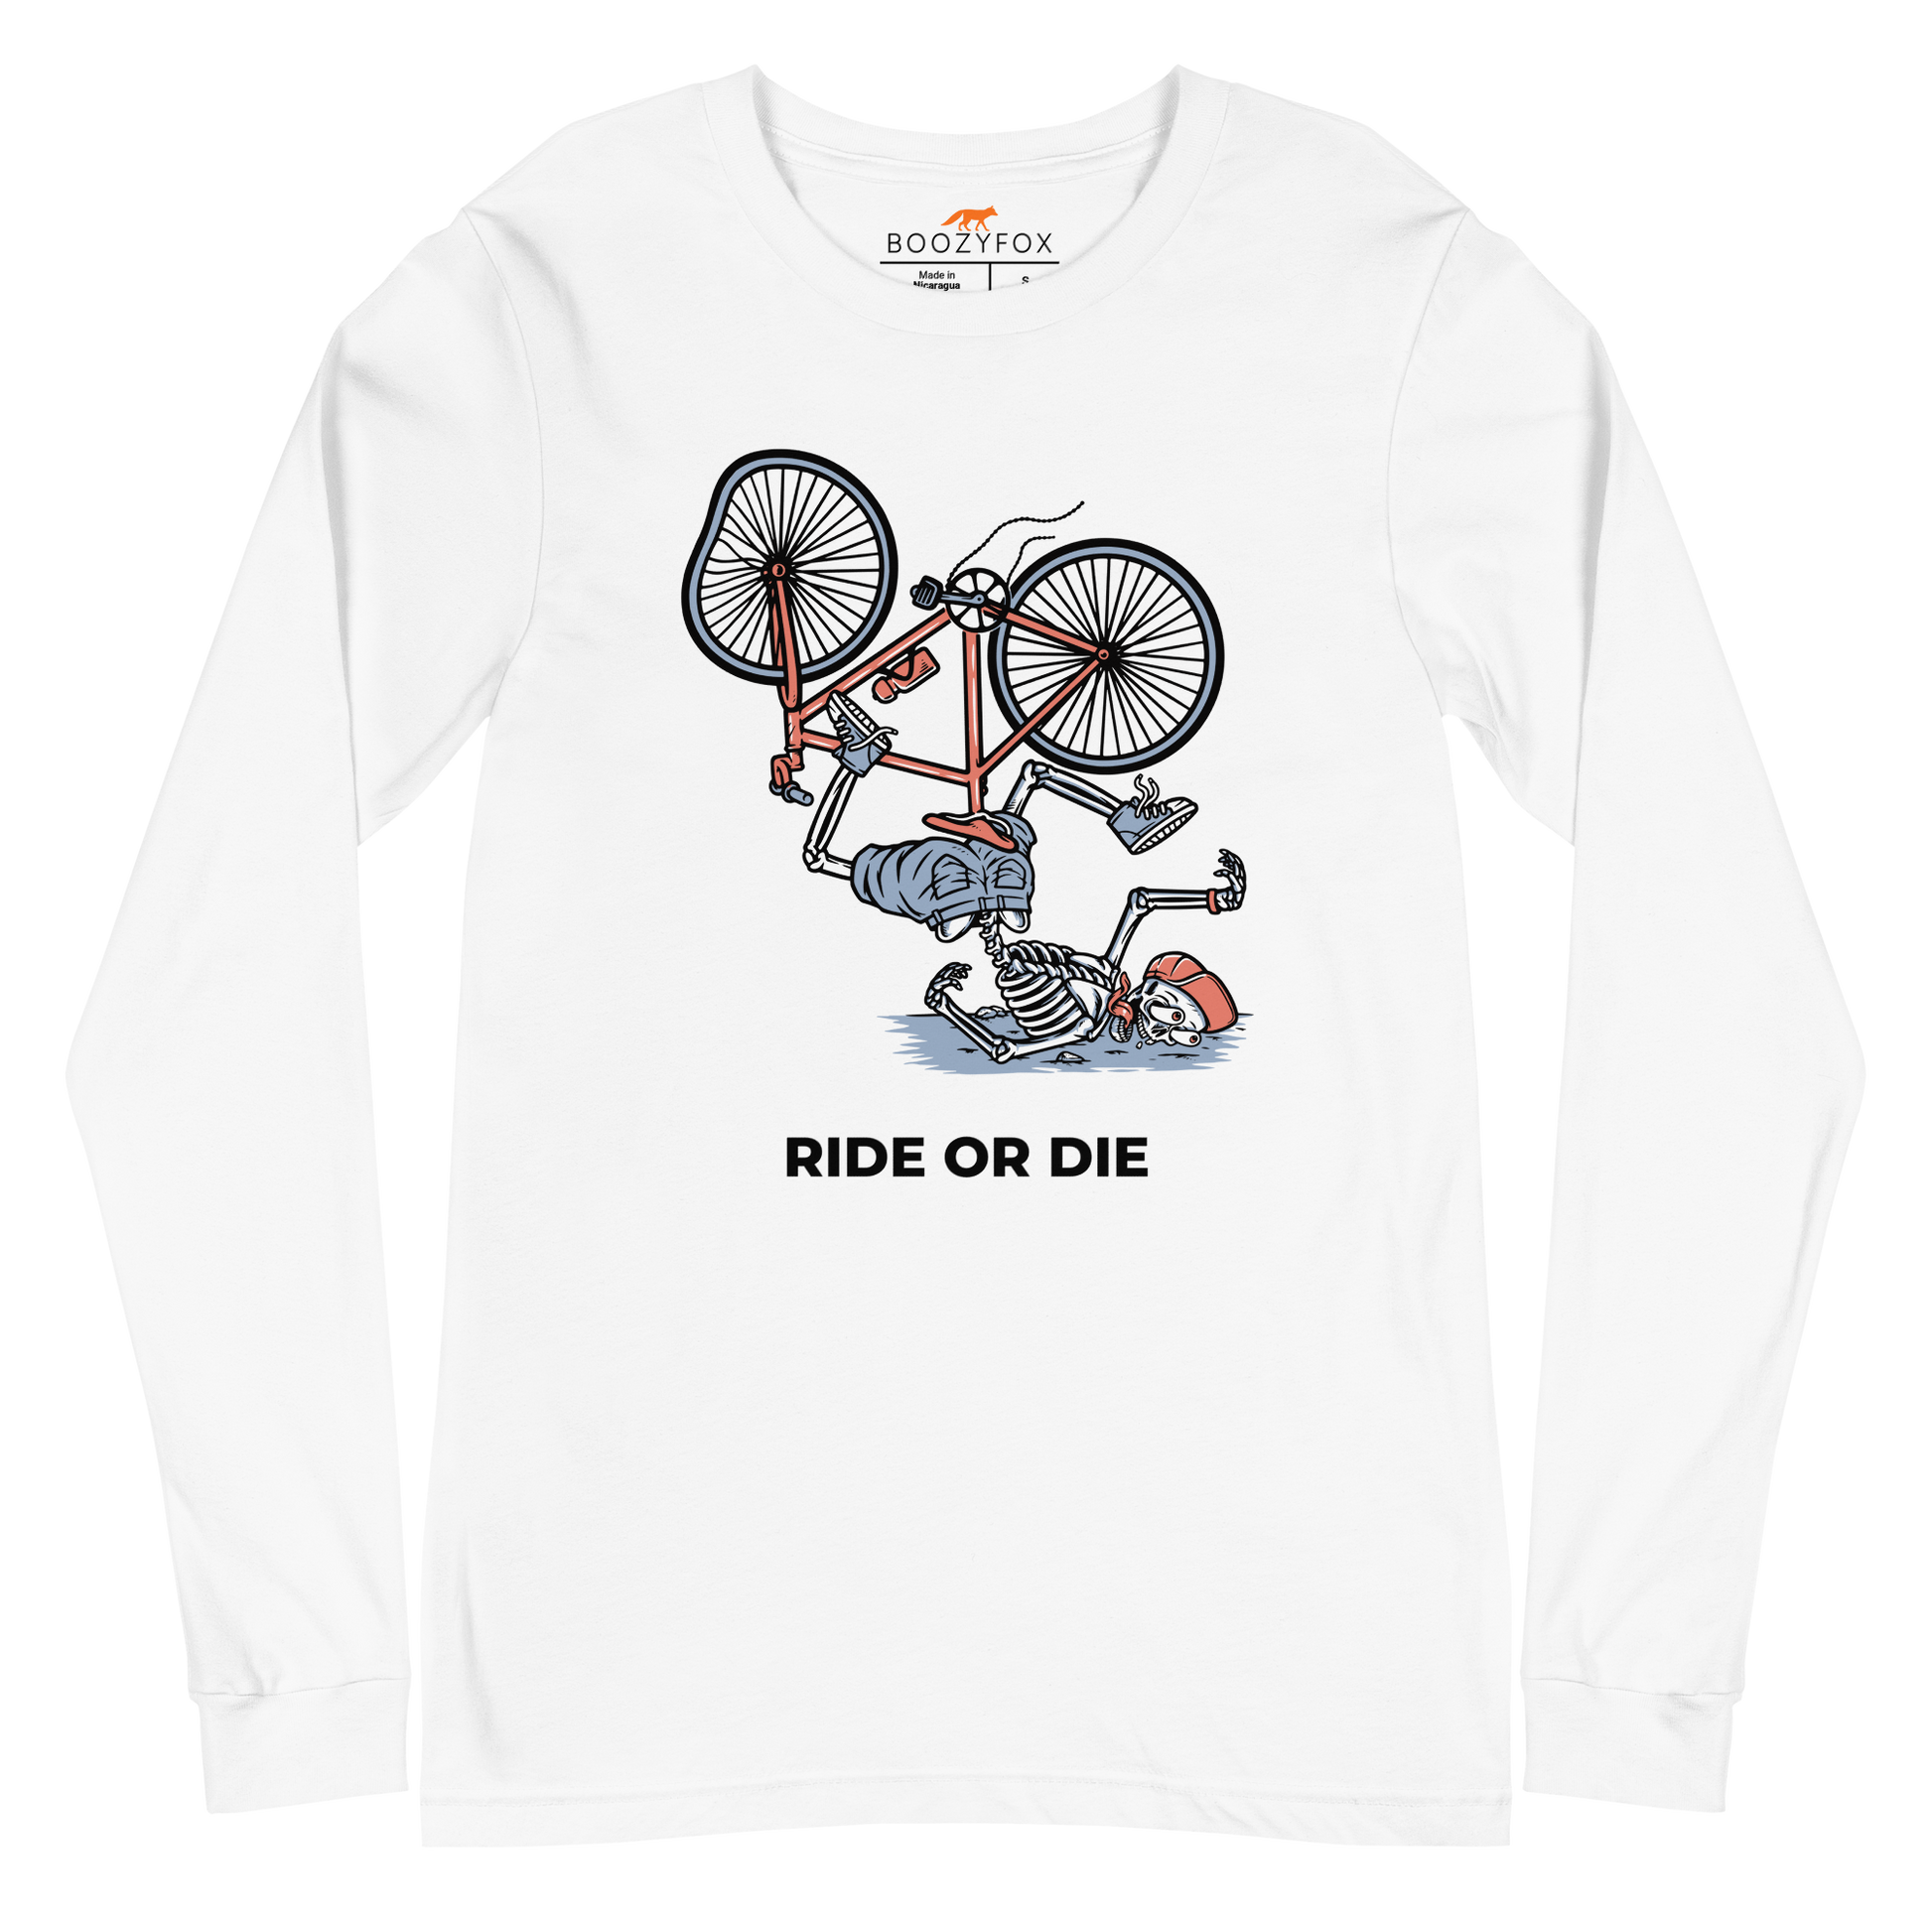 White Ride or Die Long Sleeve Tee featuring a bold Skeleton Falling While Riding a Bicycle graphic on the chest - Funny Skeleton Long Sleeve Graphic Tees - Boozy Fox